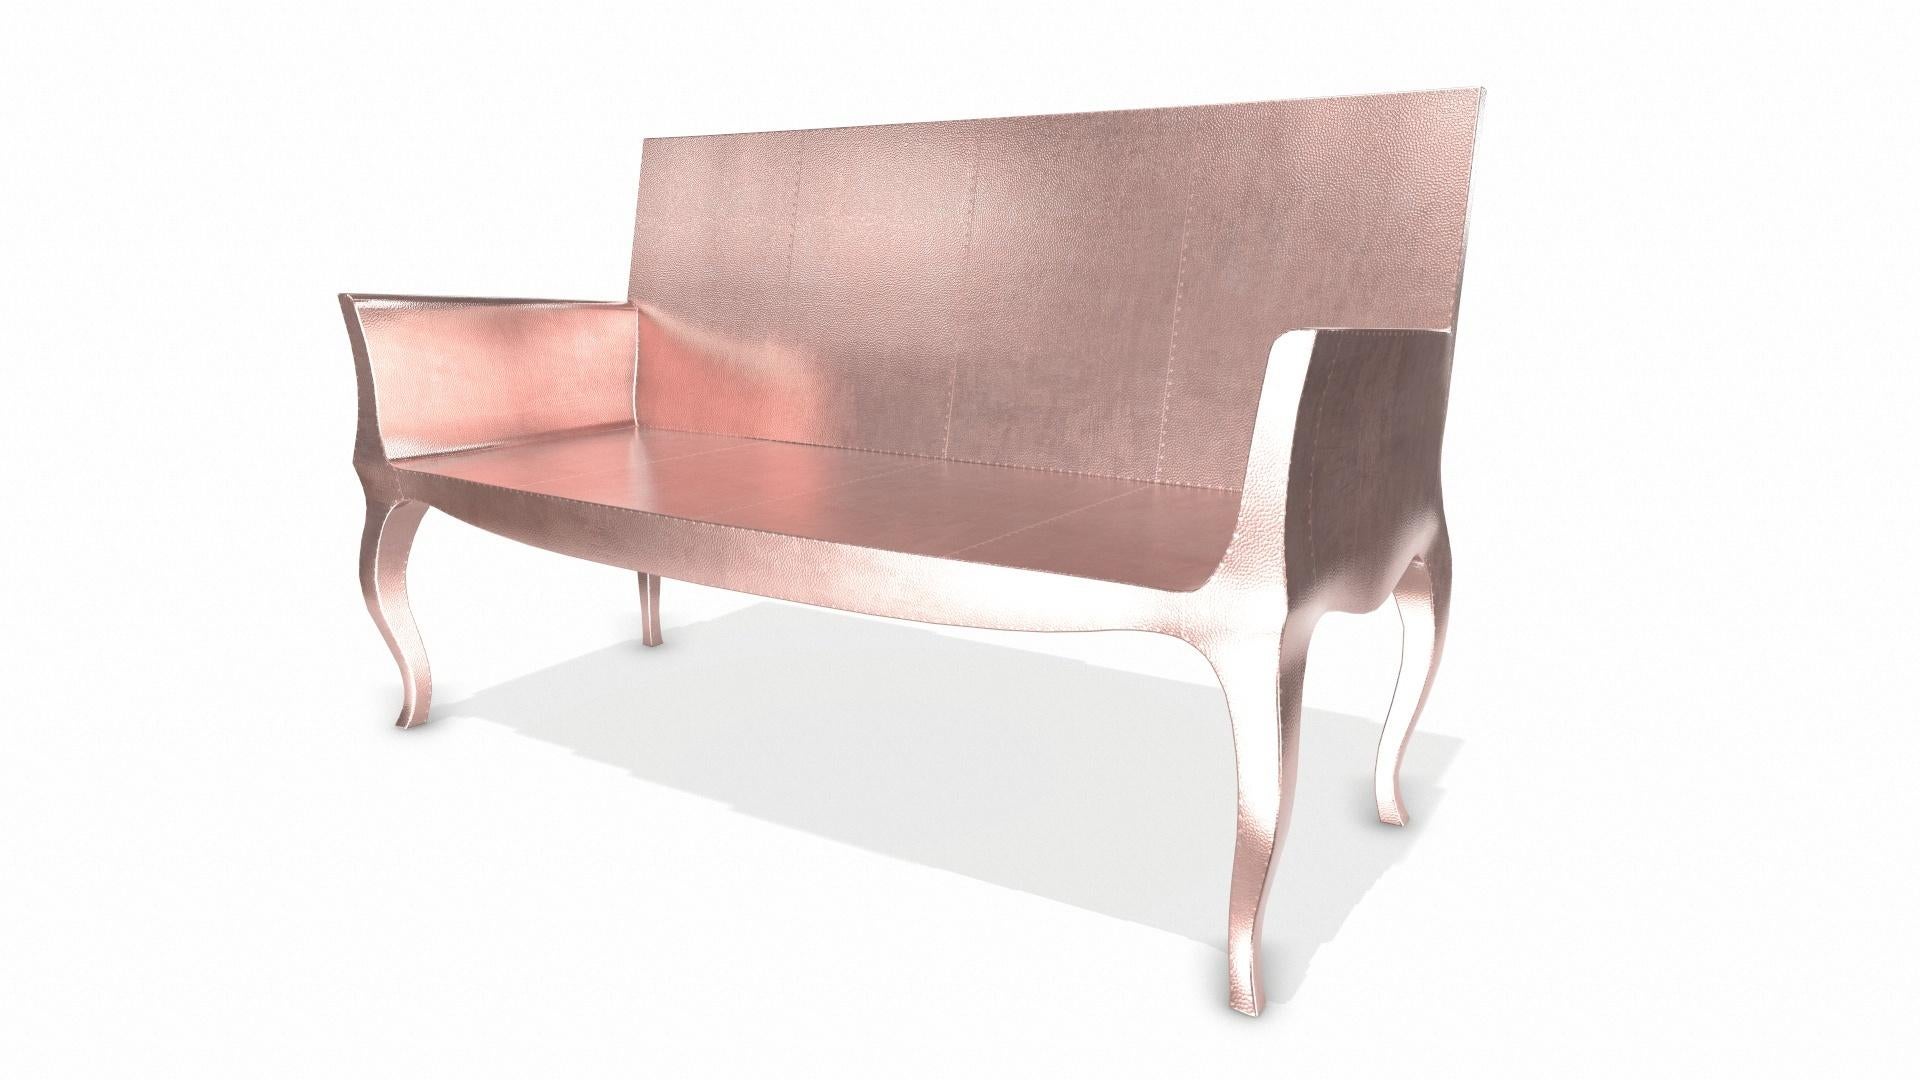 American Louise Settee Art Deco Lounge Chairs in Mid. Hammered Copper by Paul Mathieu For Sale